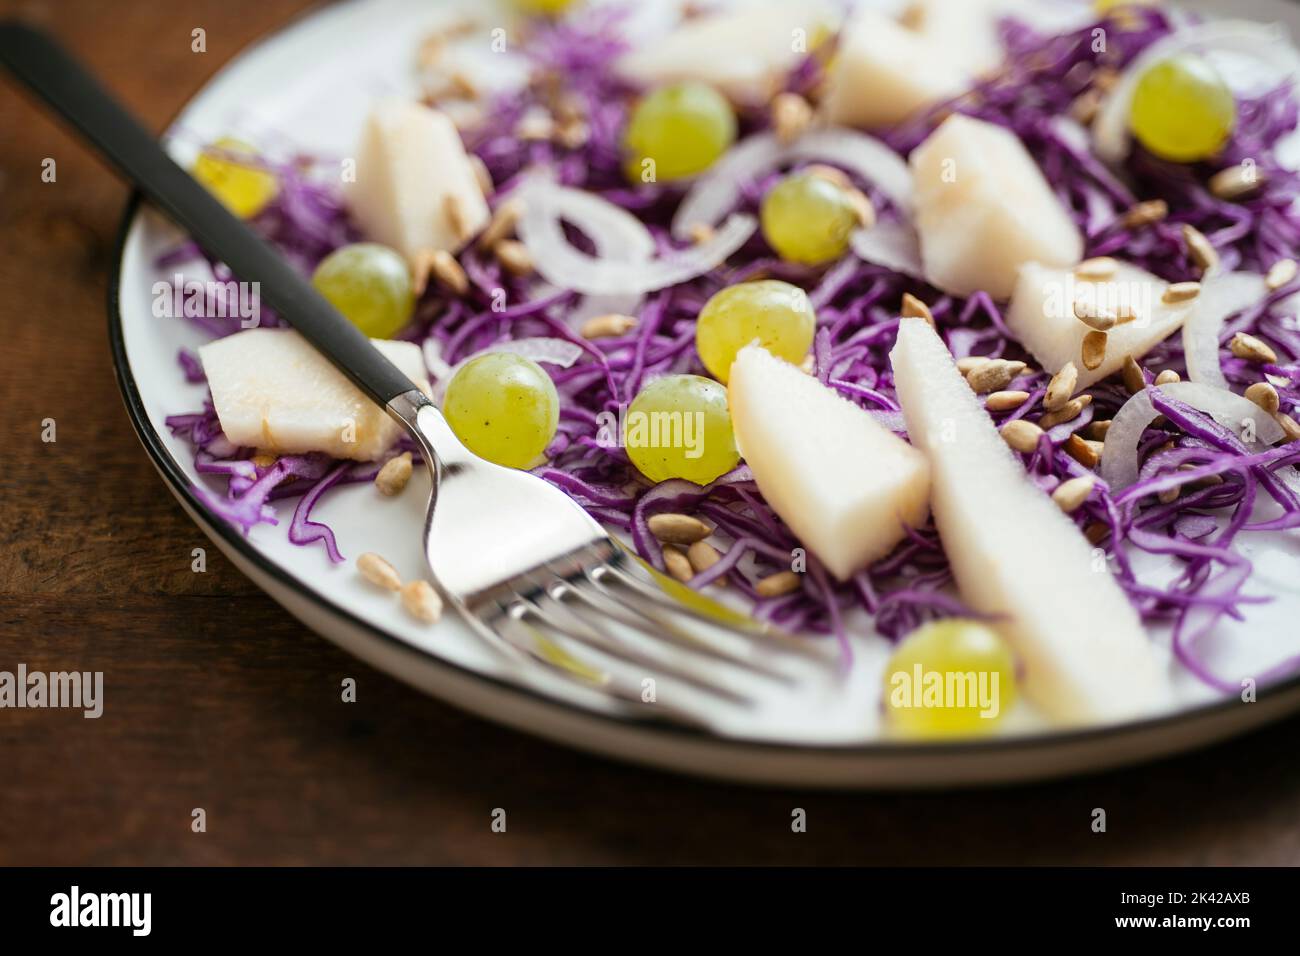 Home made healthy red cabbage salad with pears and grapes on a plate. Stock Photo